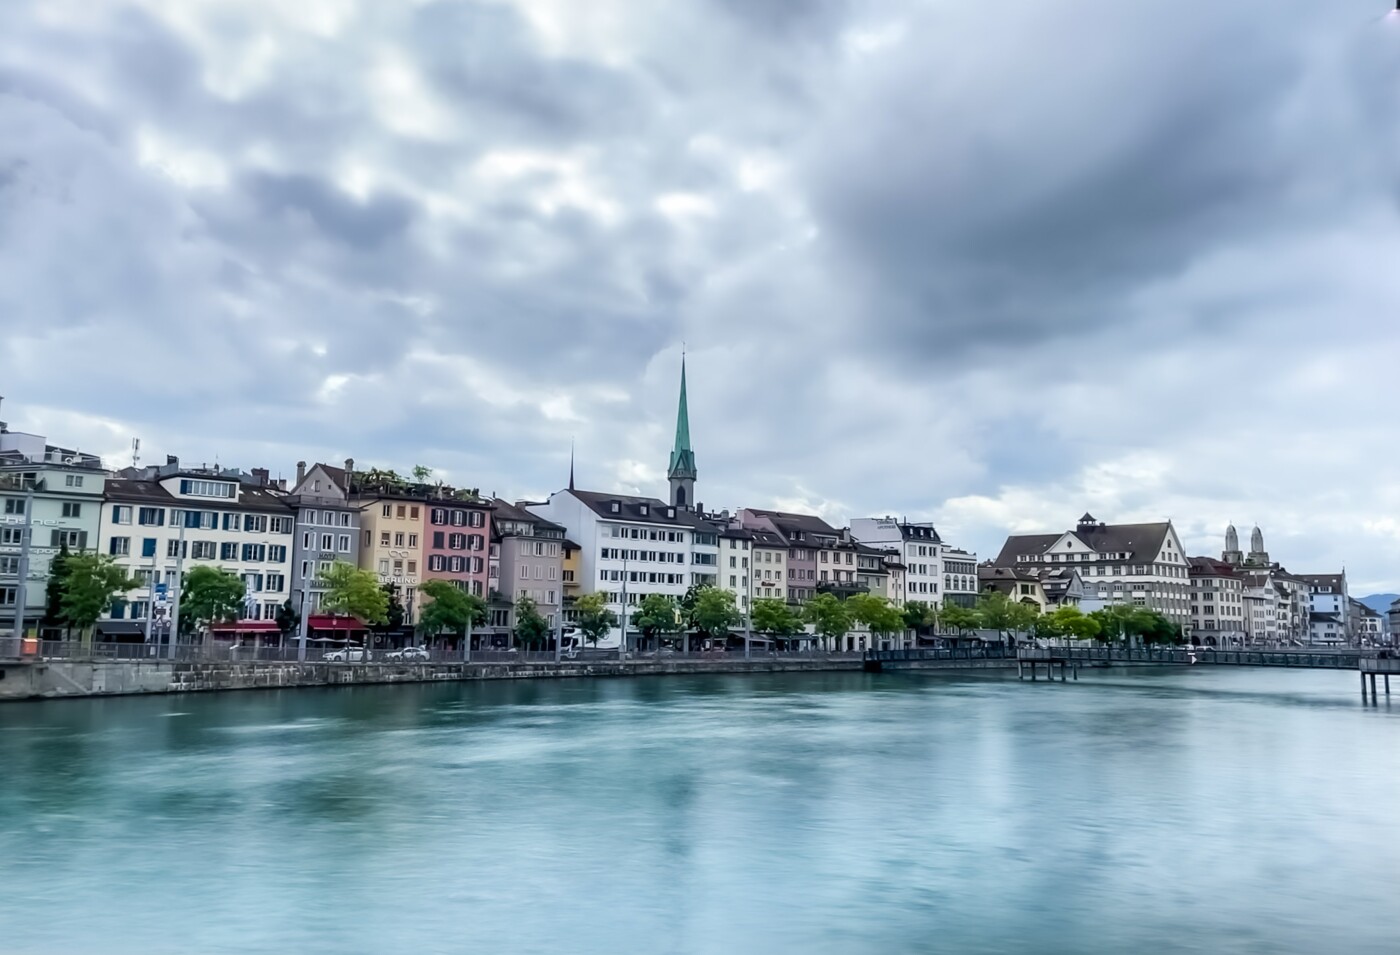 Even on a cloudy day the city of Zurich is beautiful. In this image the river Limmat is shown. It’s...